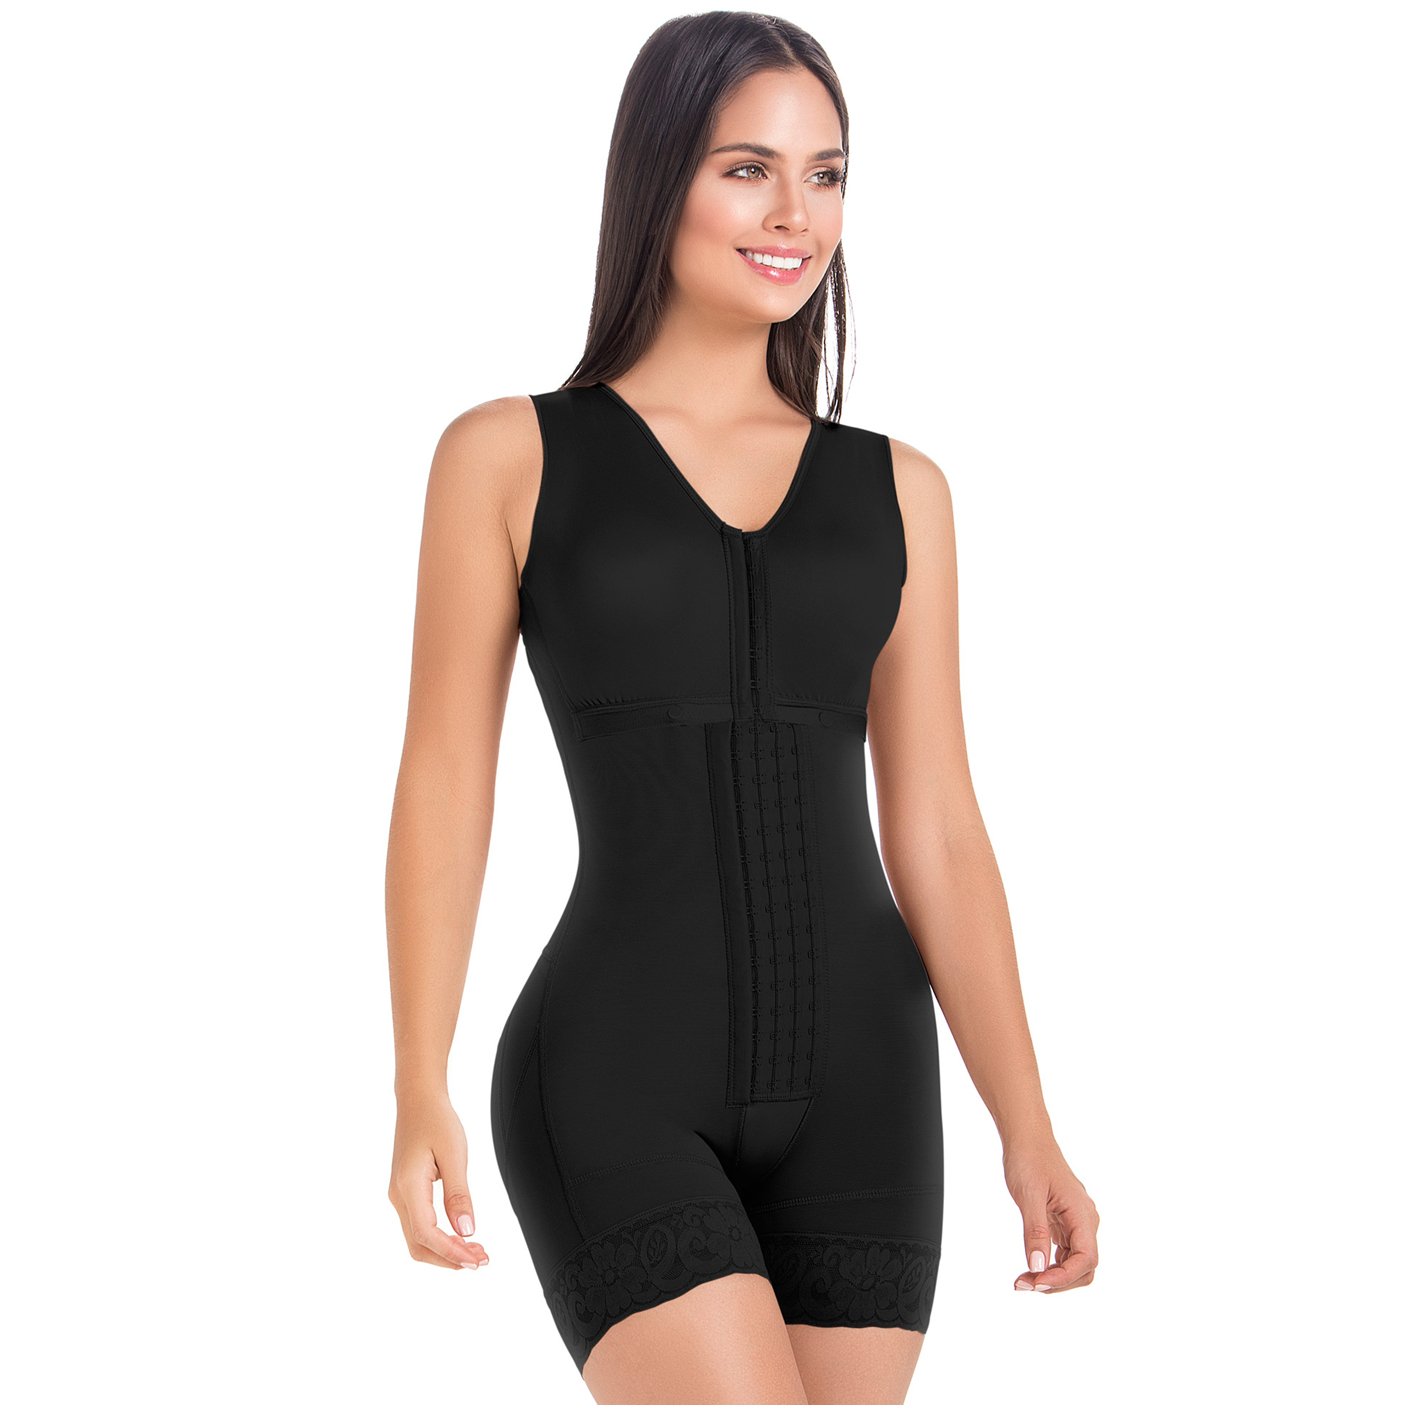 Post-Surgery Strapless Full Body Shaper 783- By AnnamaryeColombian